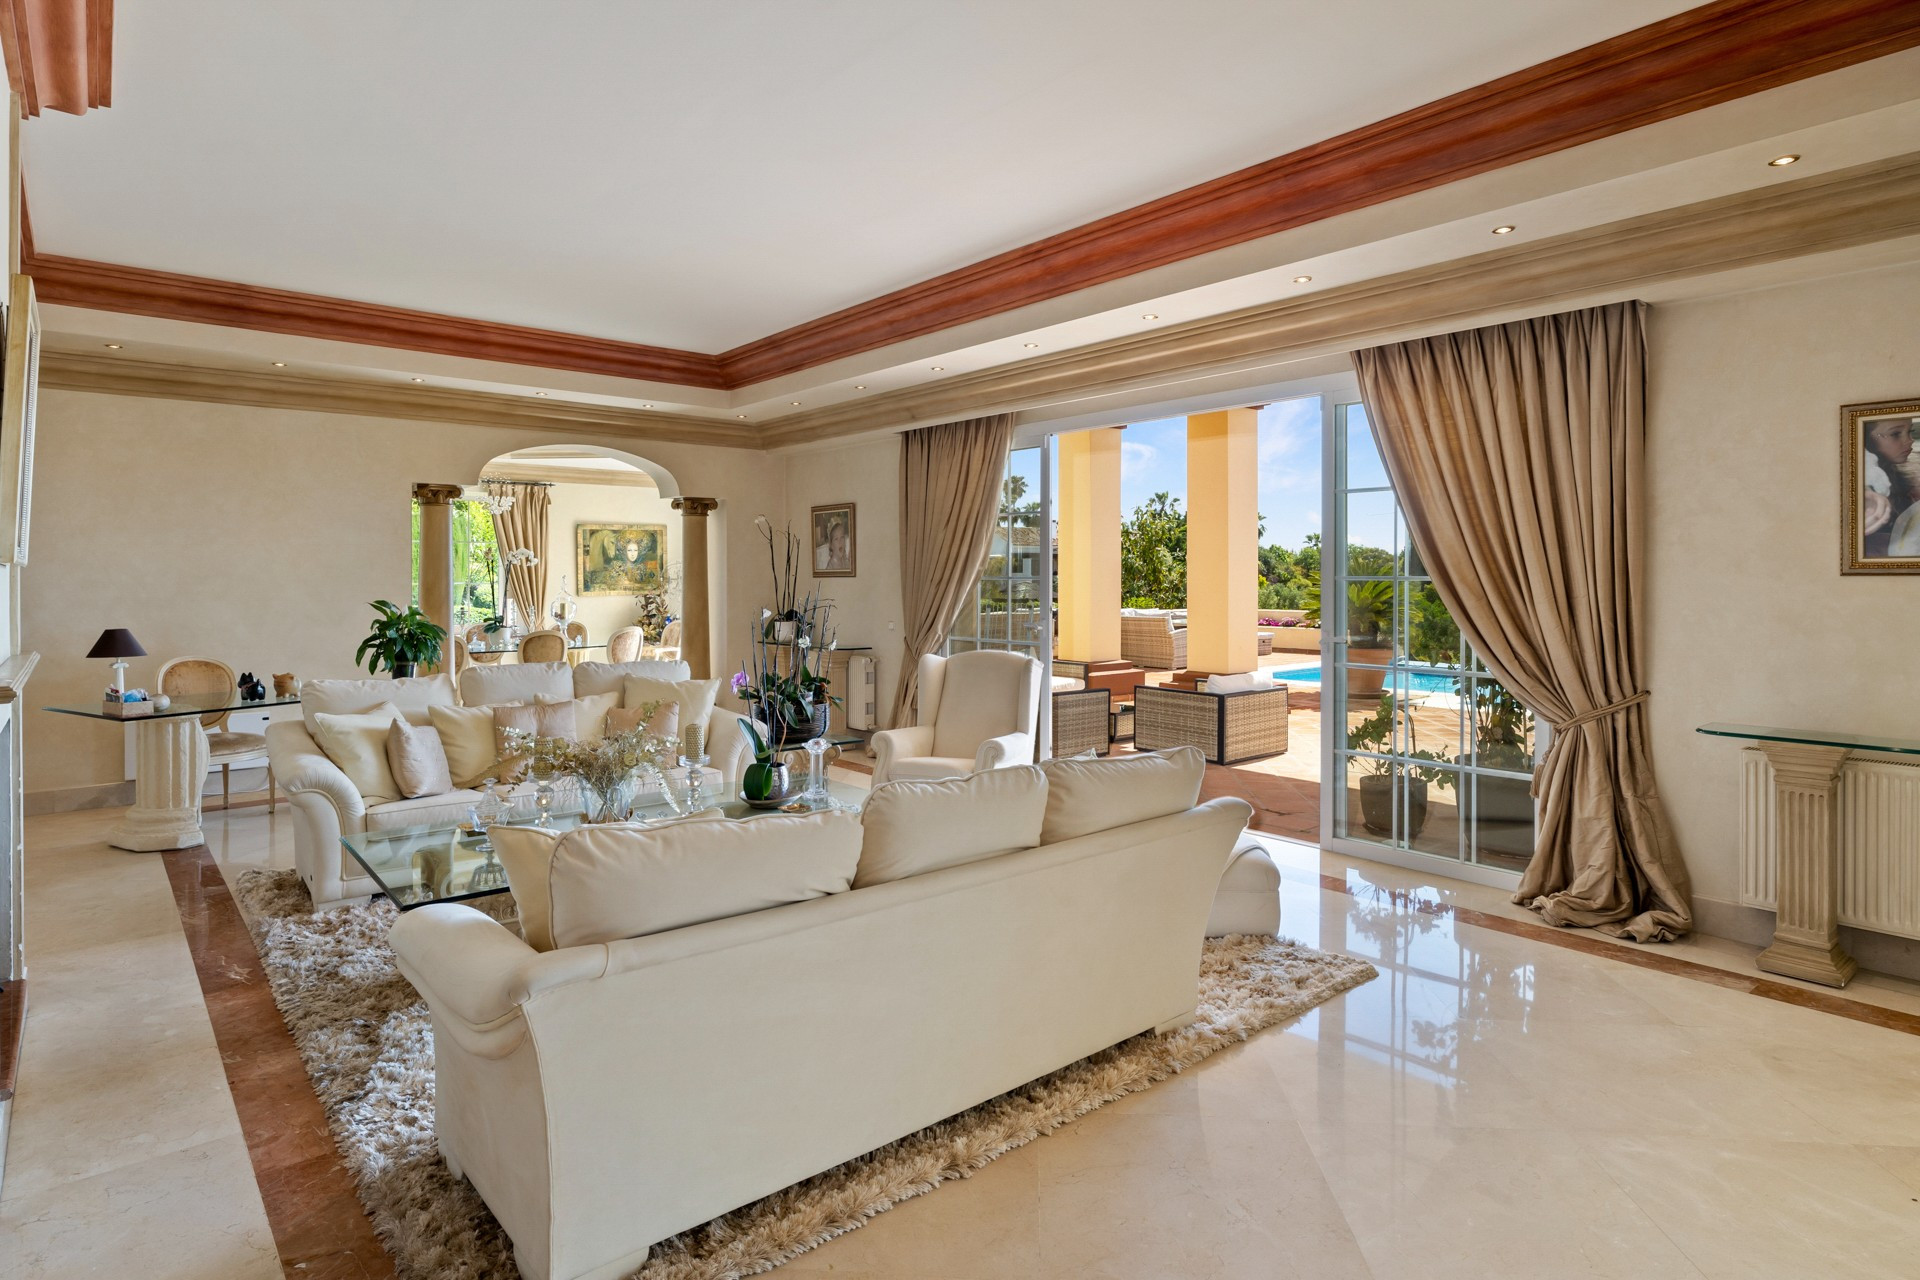 Classical style villa in El Paraiso Alto, fully private with sea and mountain views, close to all amenities and golf